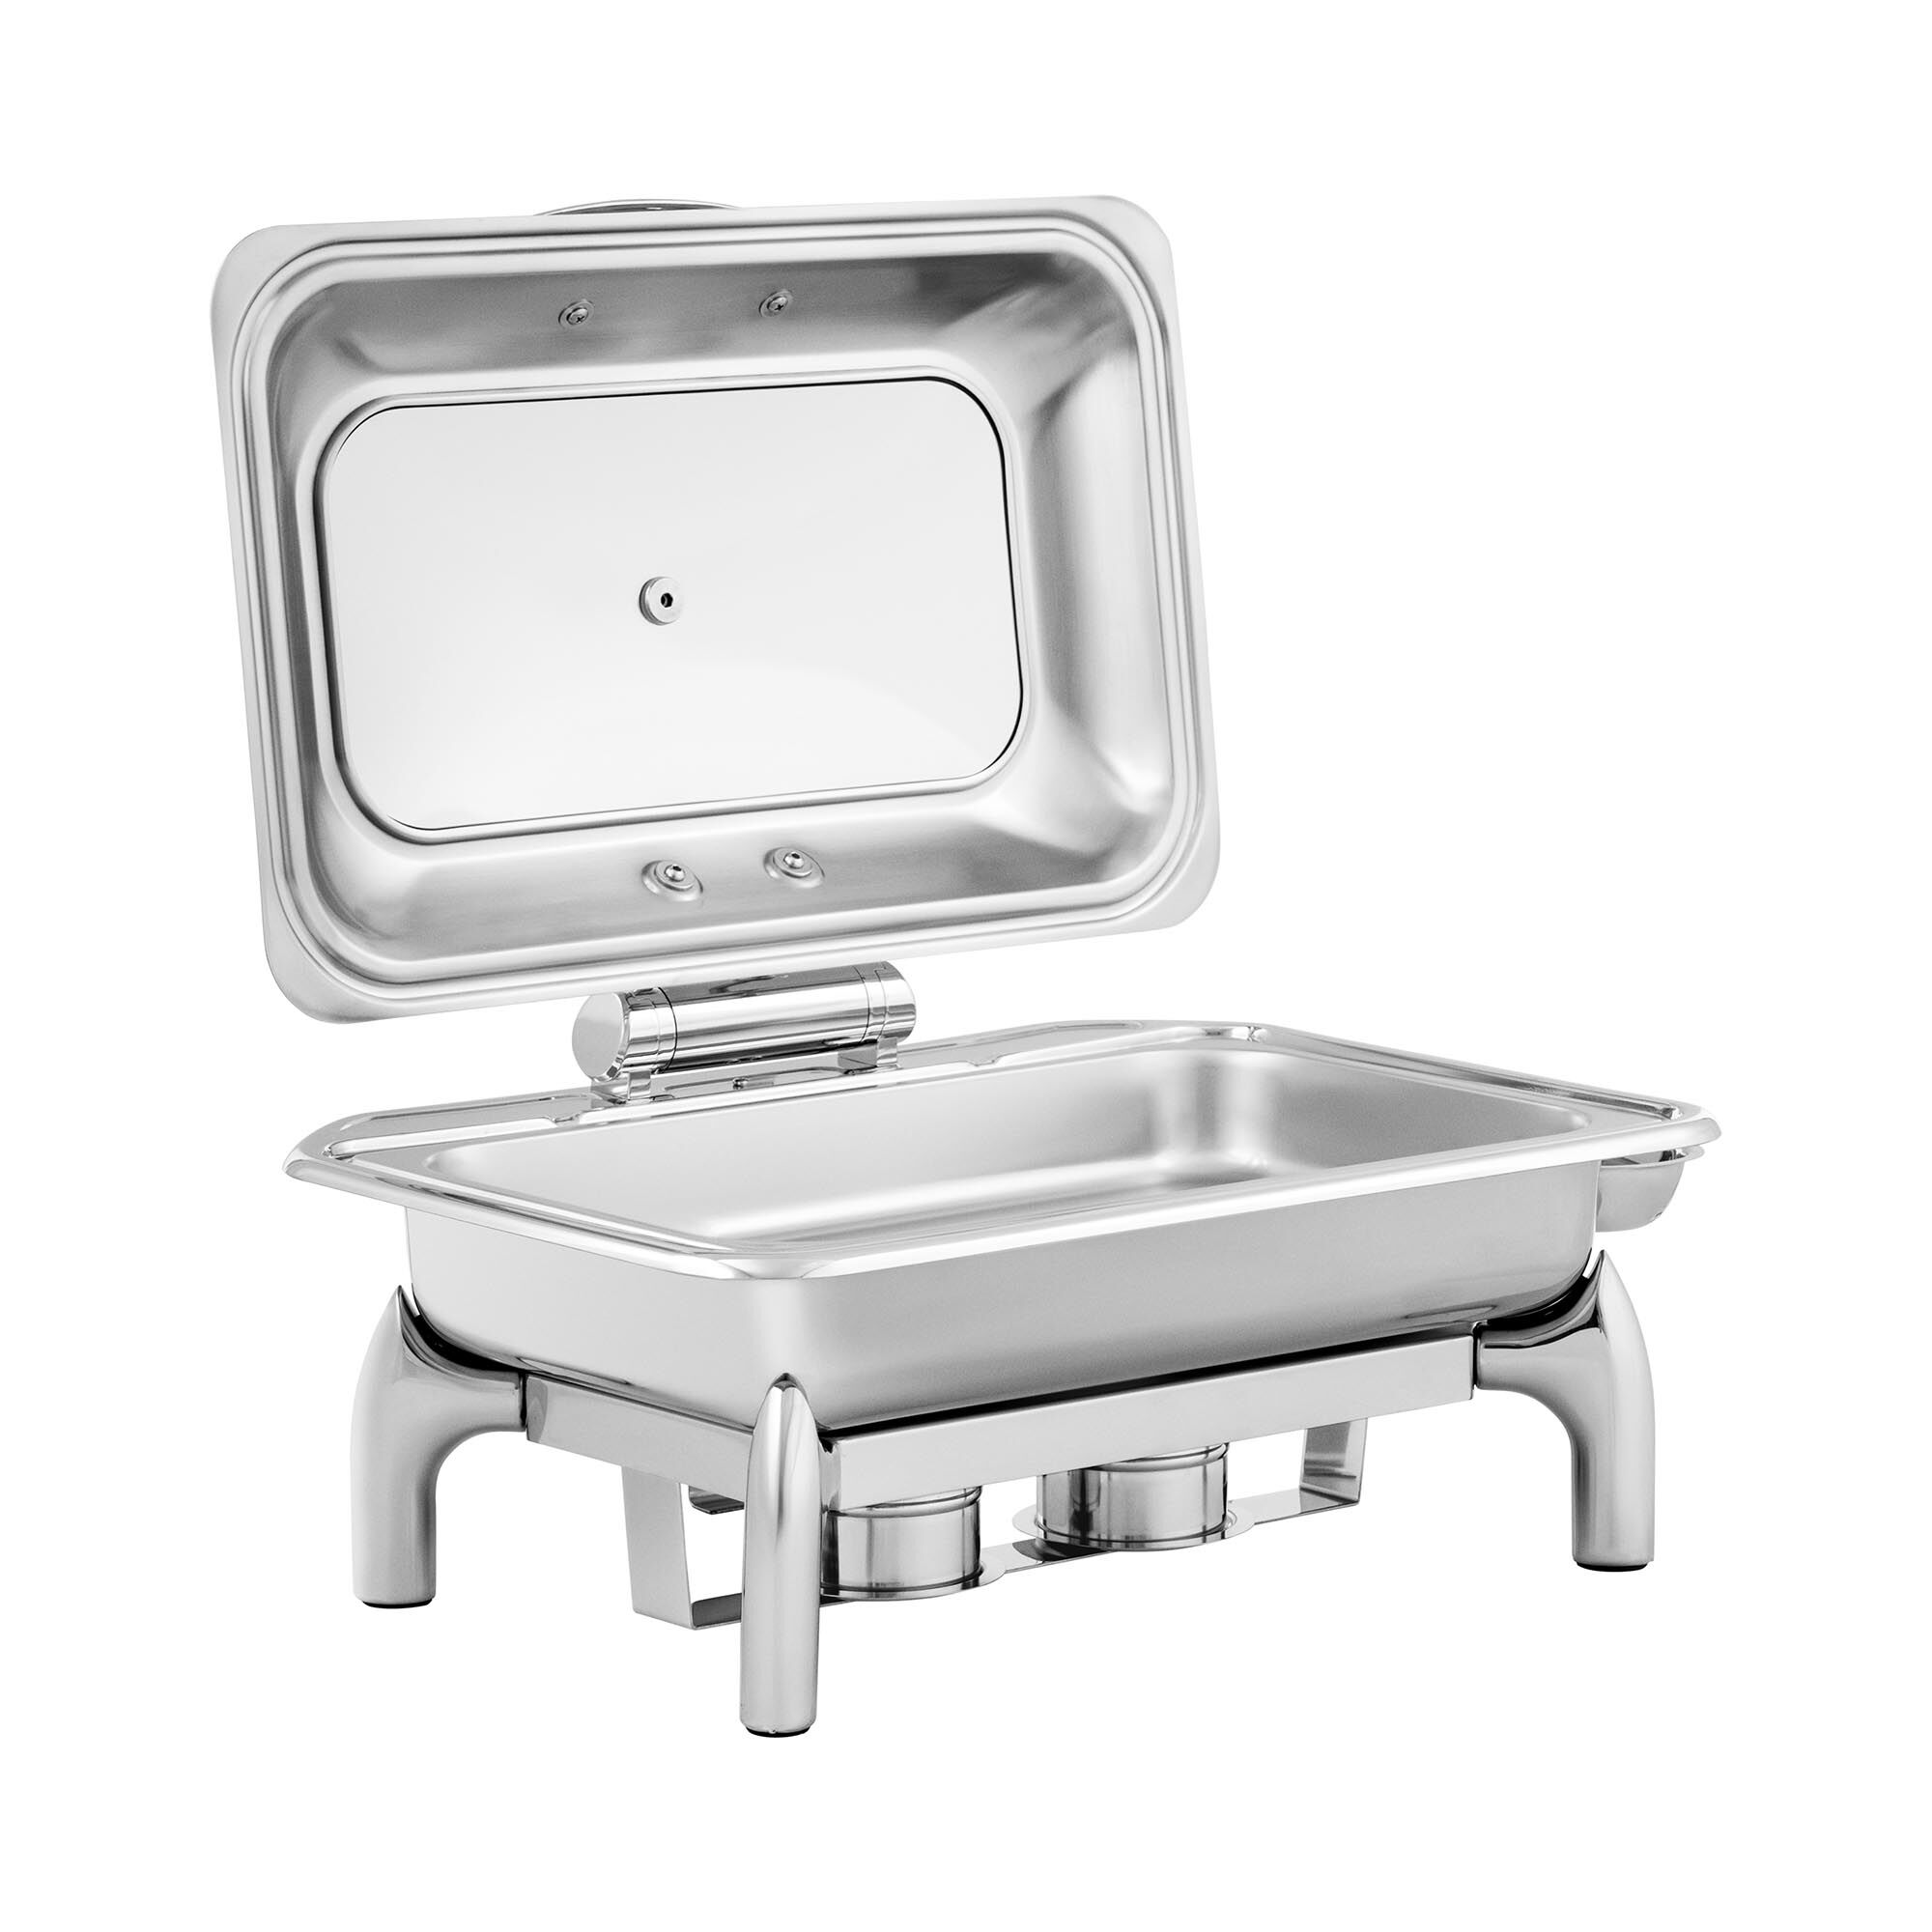 Royal Catering Chafing Dish - GN 1/1 - Royal Catering - 8.5 L - 2 fuel cells